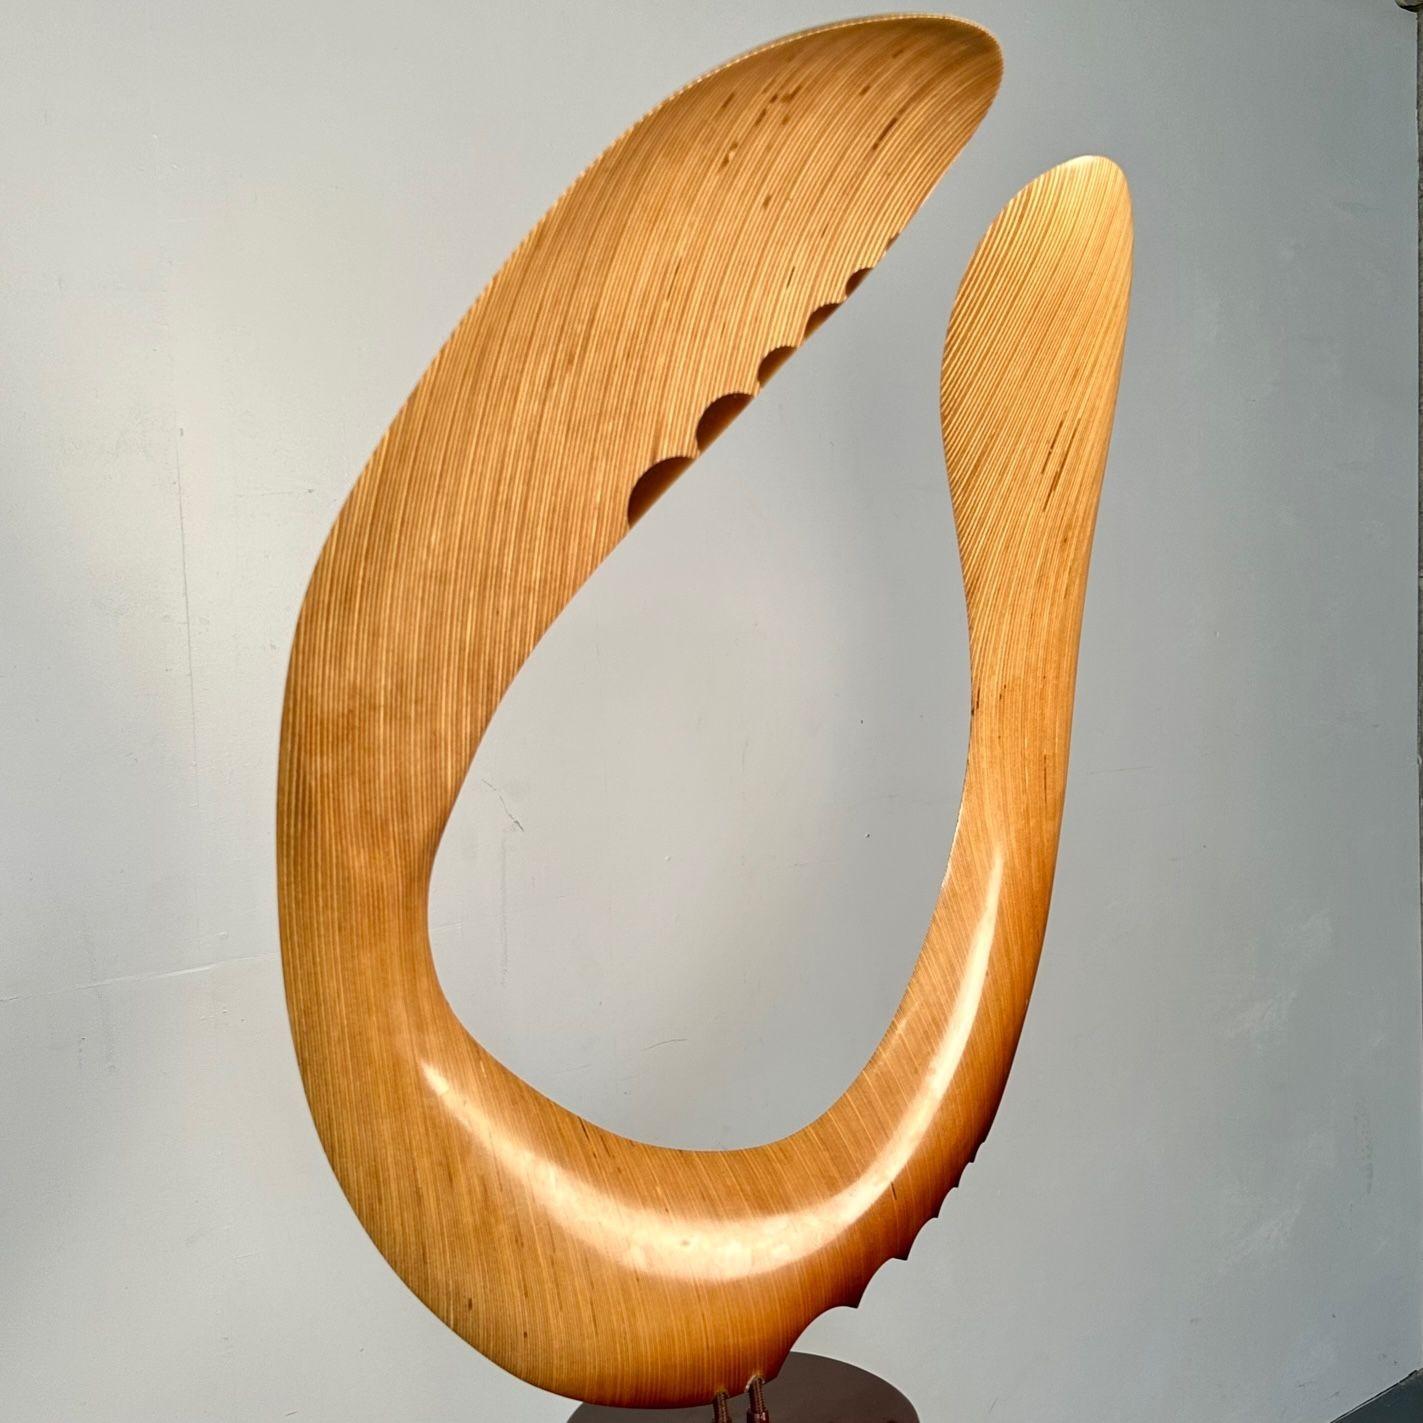  David Hymes, Contemporary, Boomerang Sculpture, Plywood, Steel Pedestal, 2010s For Sale 3